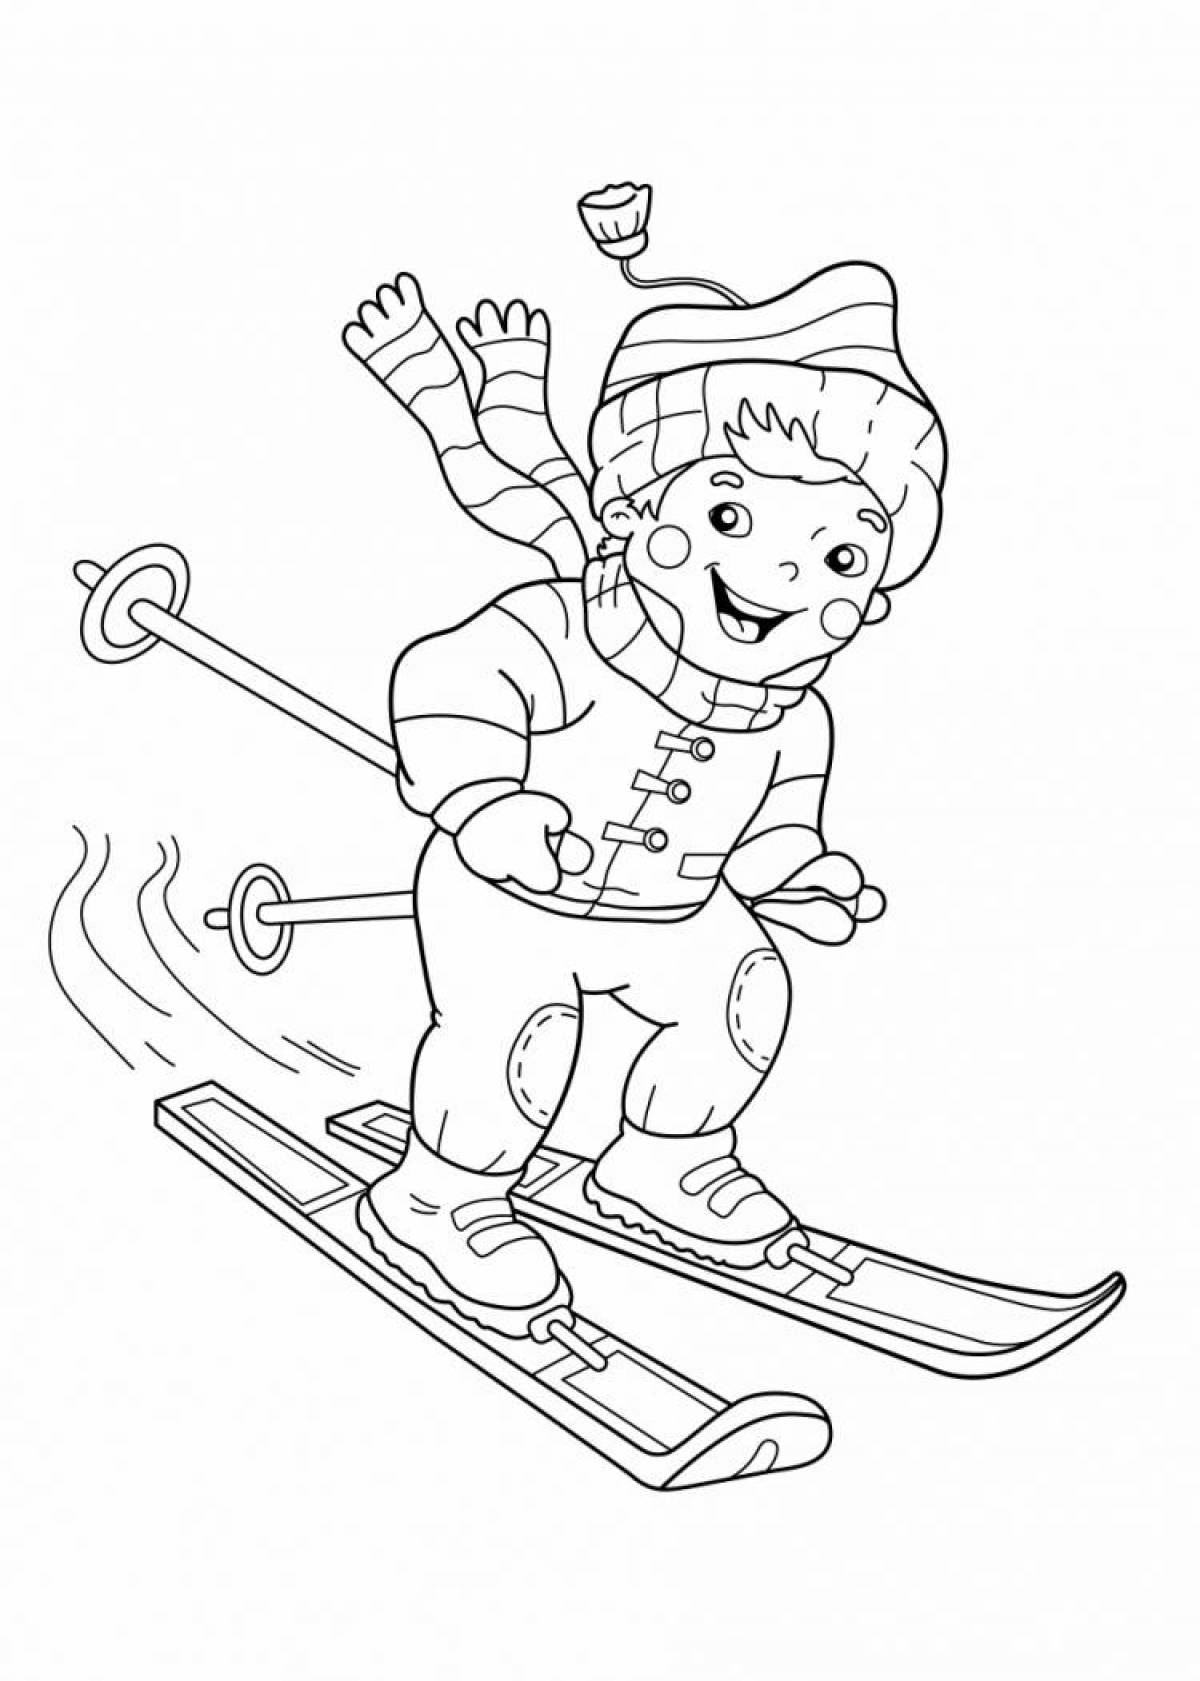 Magic winter sports coloring book for 5-6 year olds